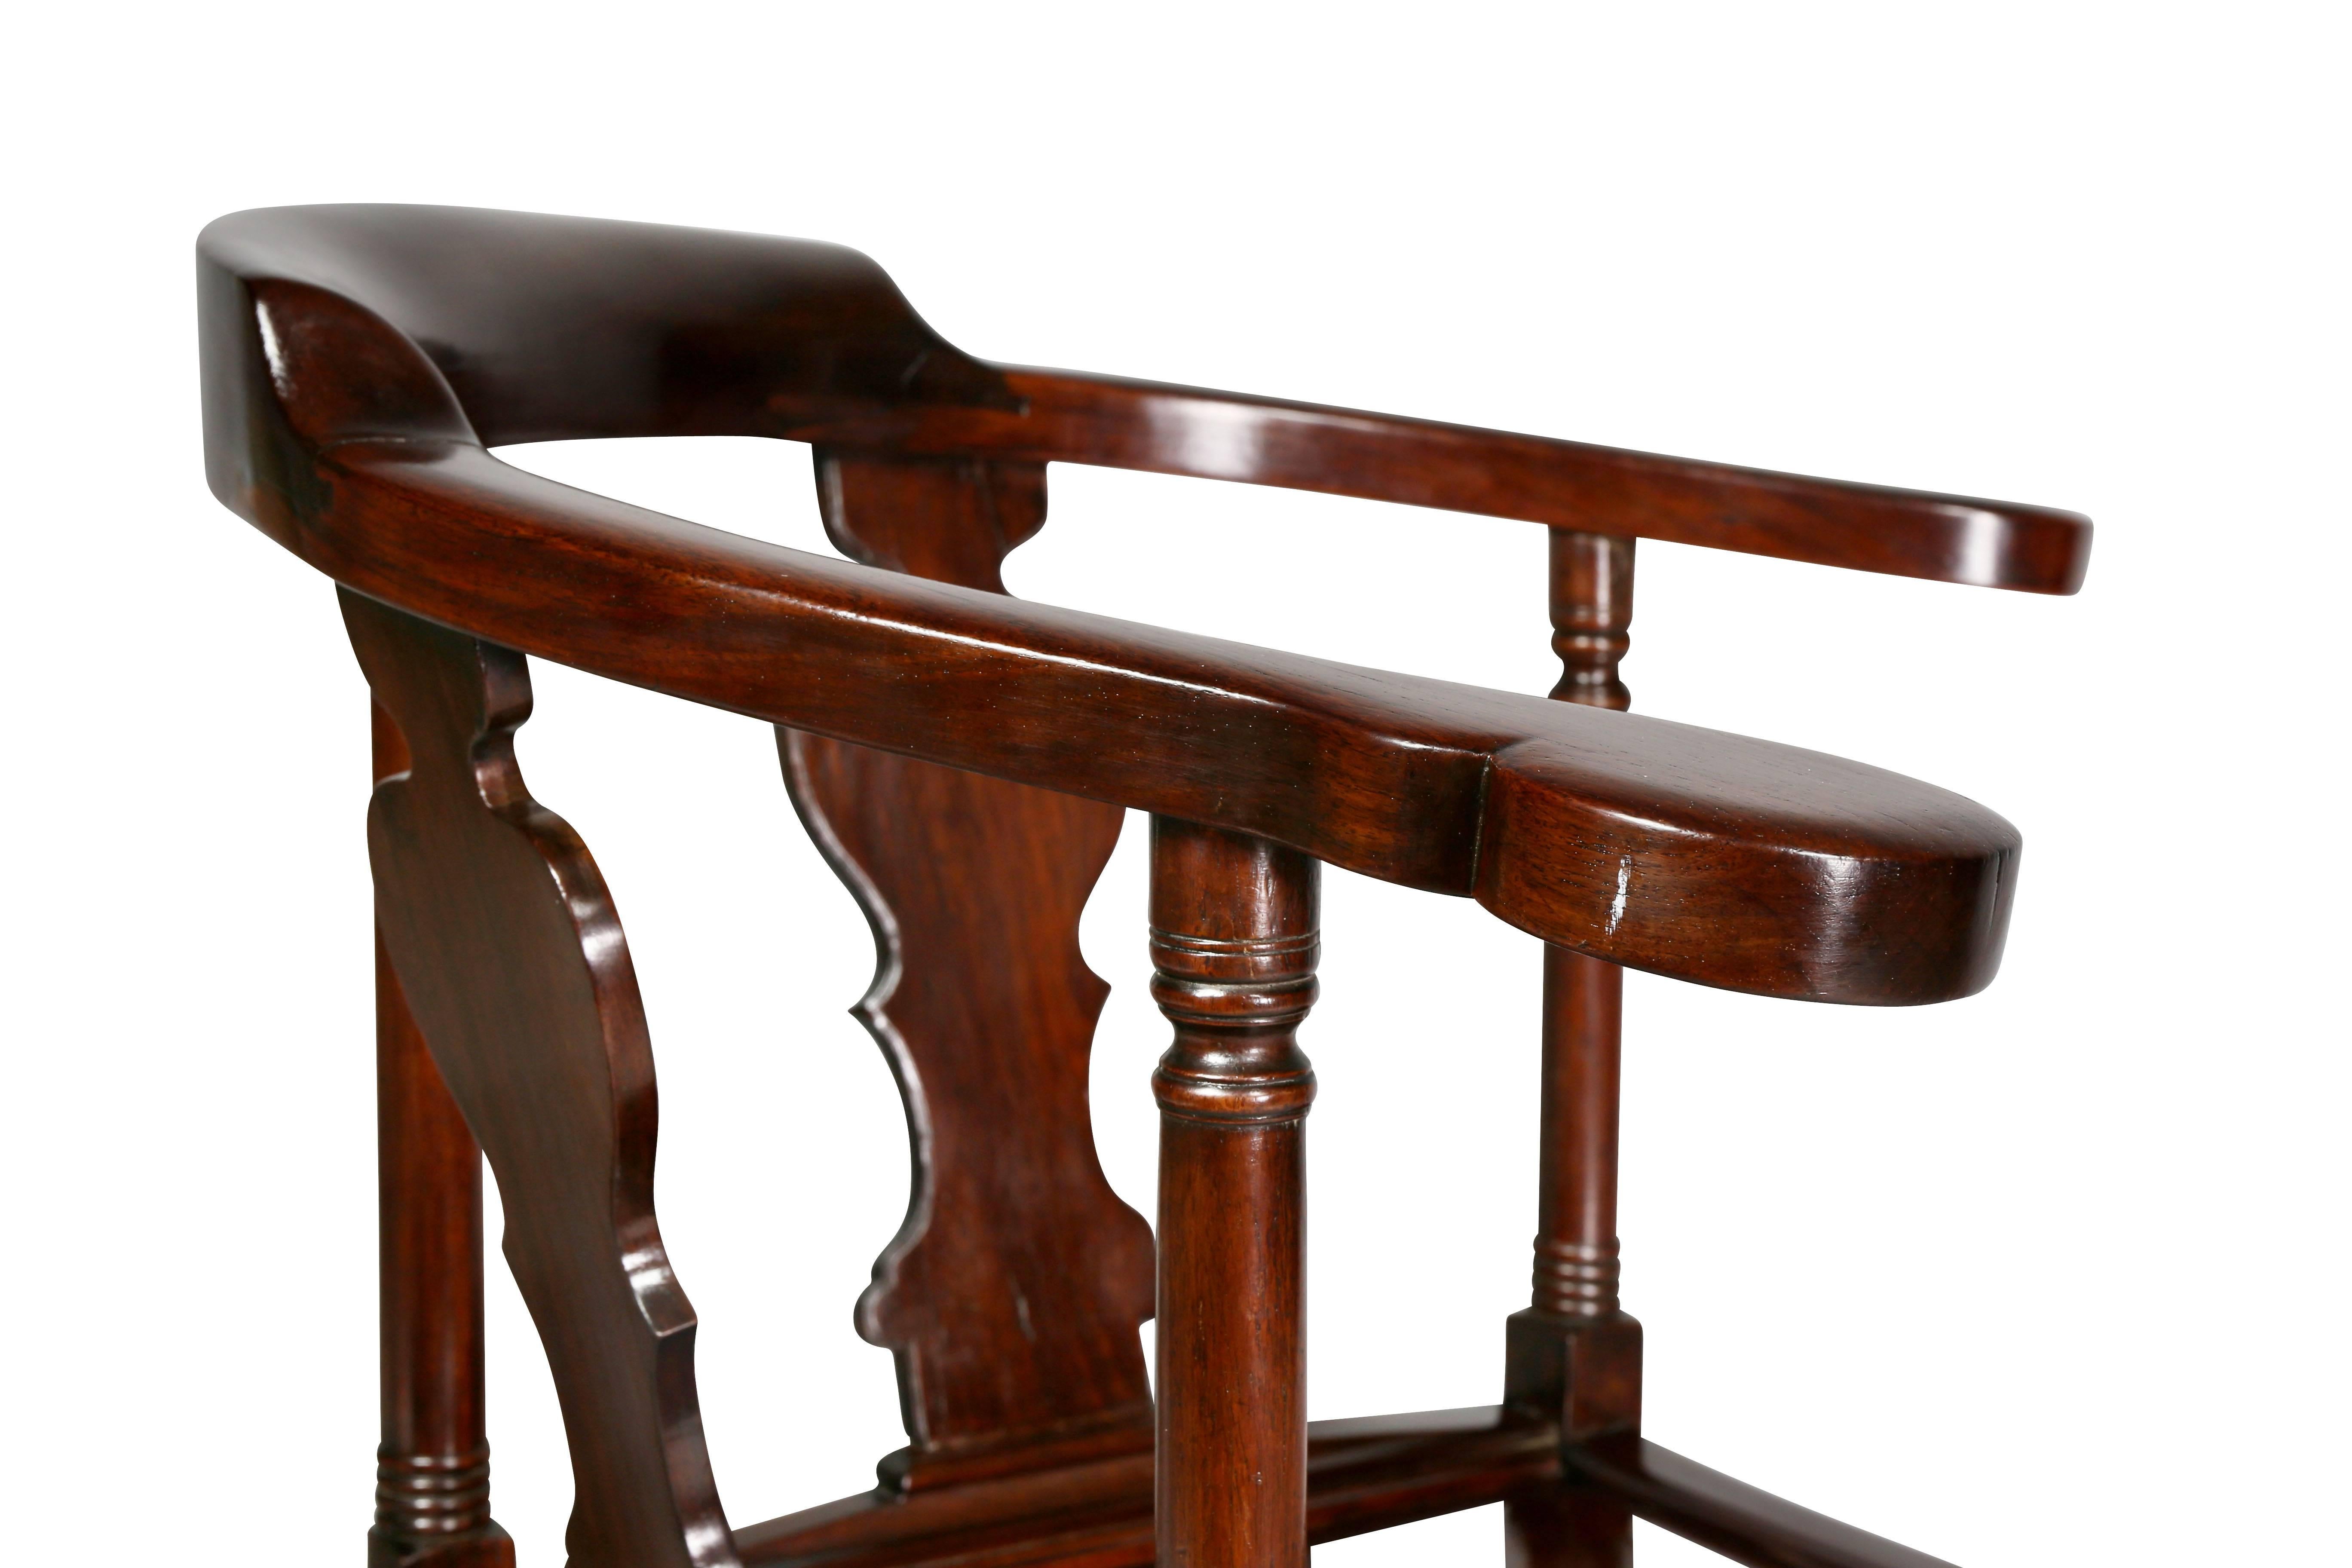 In the Georgian taste, horseshoe back, two vasiform splats, solid panel seat raised on a carved cabriole leg with claw and ball foot joined by a X-form turned stretcher.